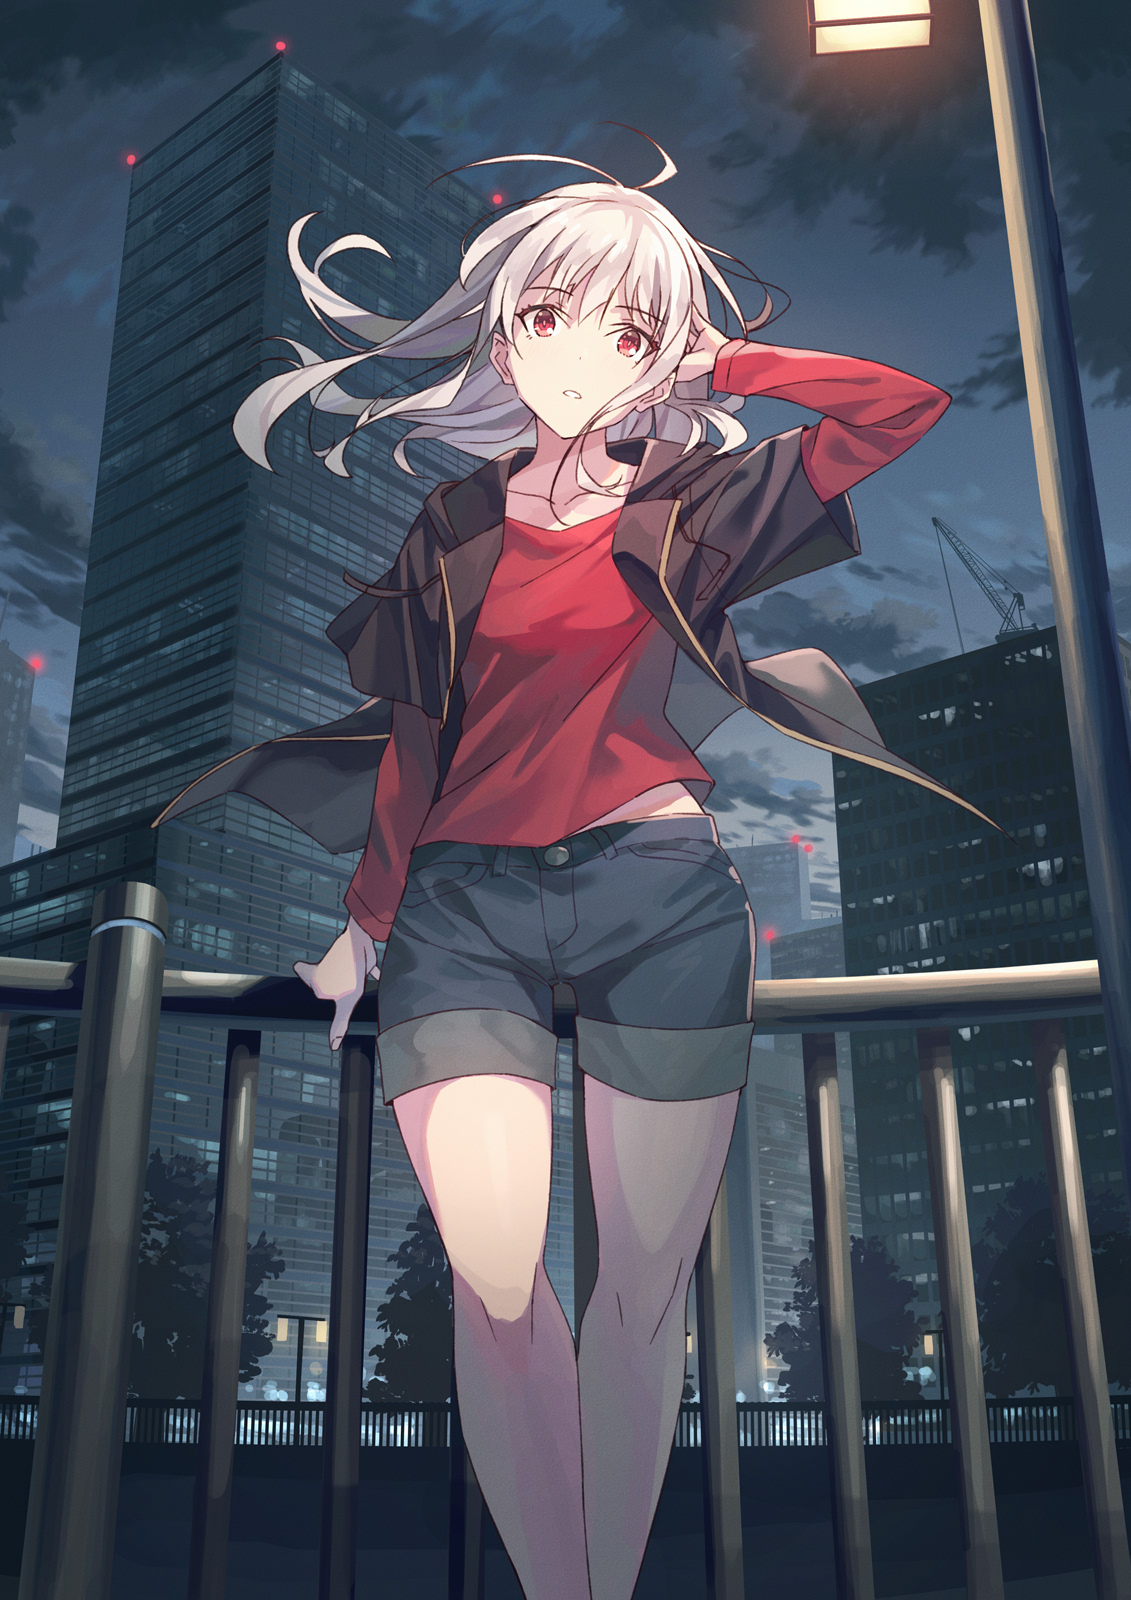 Anime 1131x1600 anime anime girls portrait display original characters Koh RD night building silver hair red eyes open jacket shorts